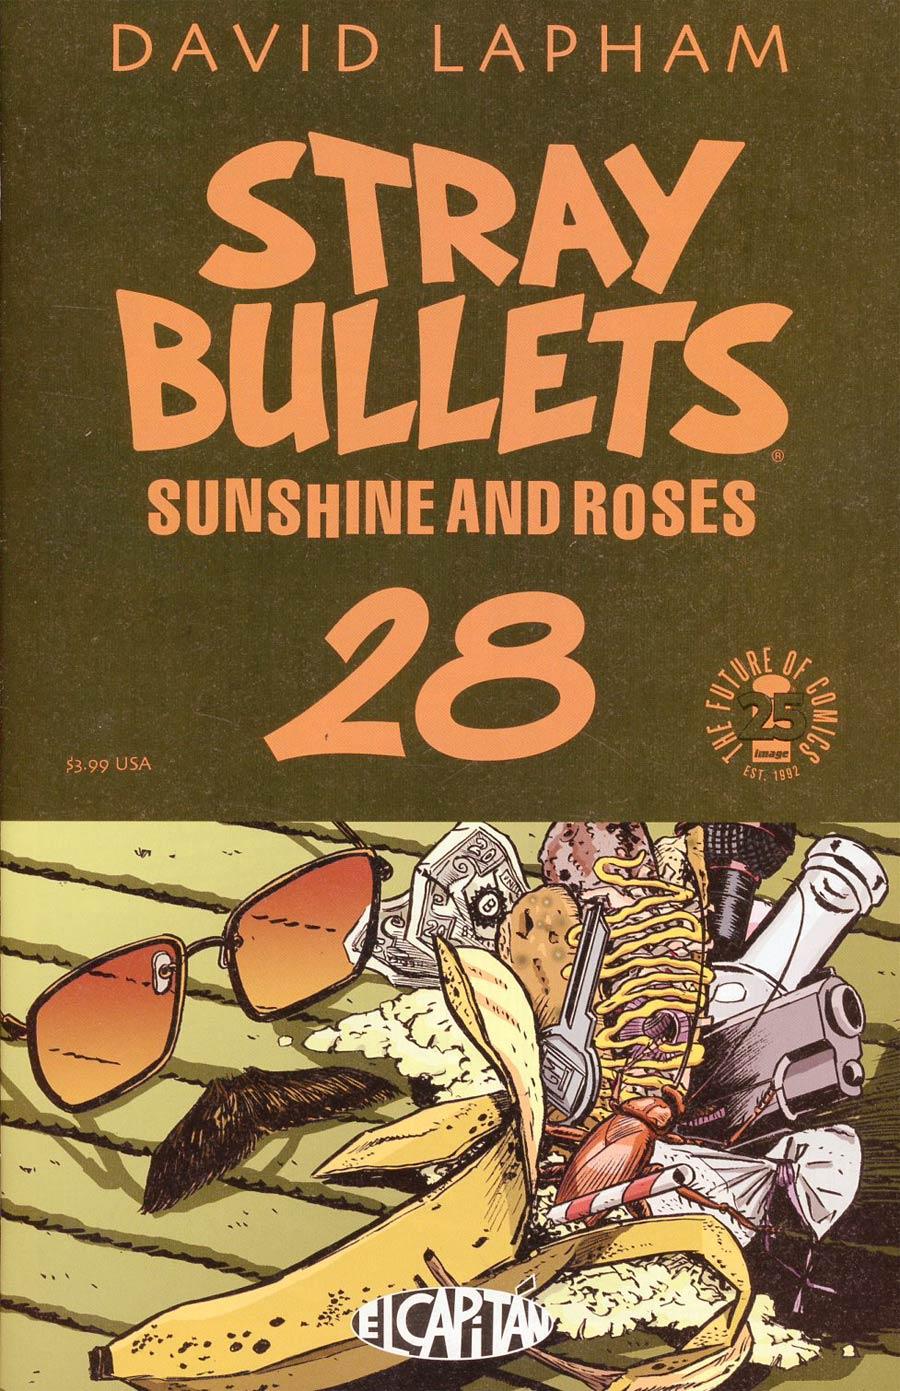 Stray Bullets Sunshine And Roses Vol. 1 #28